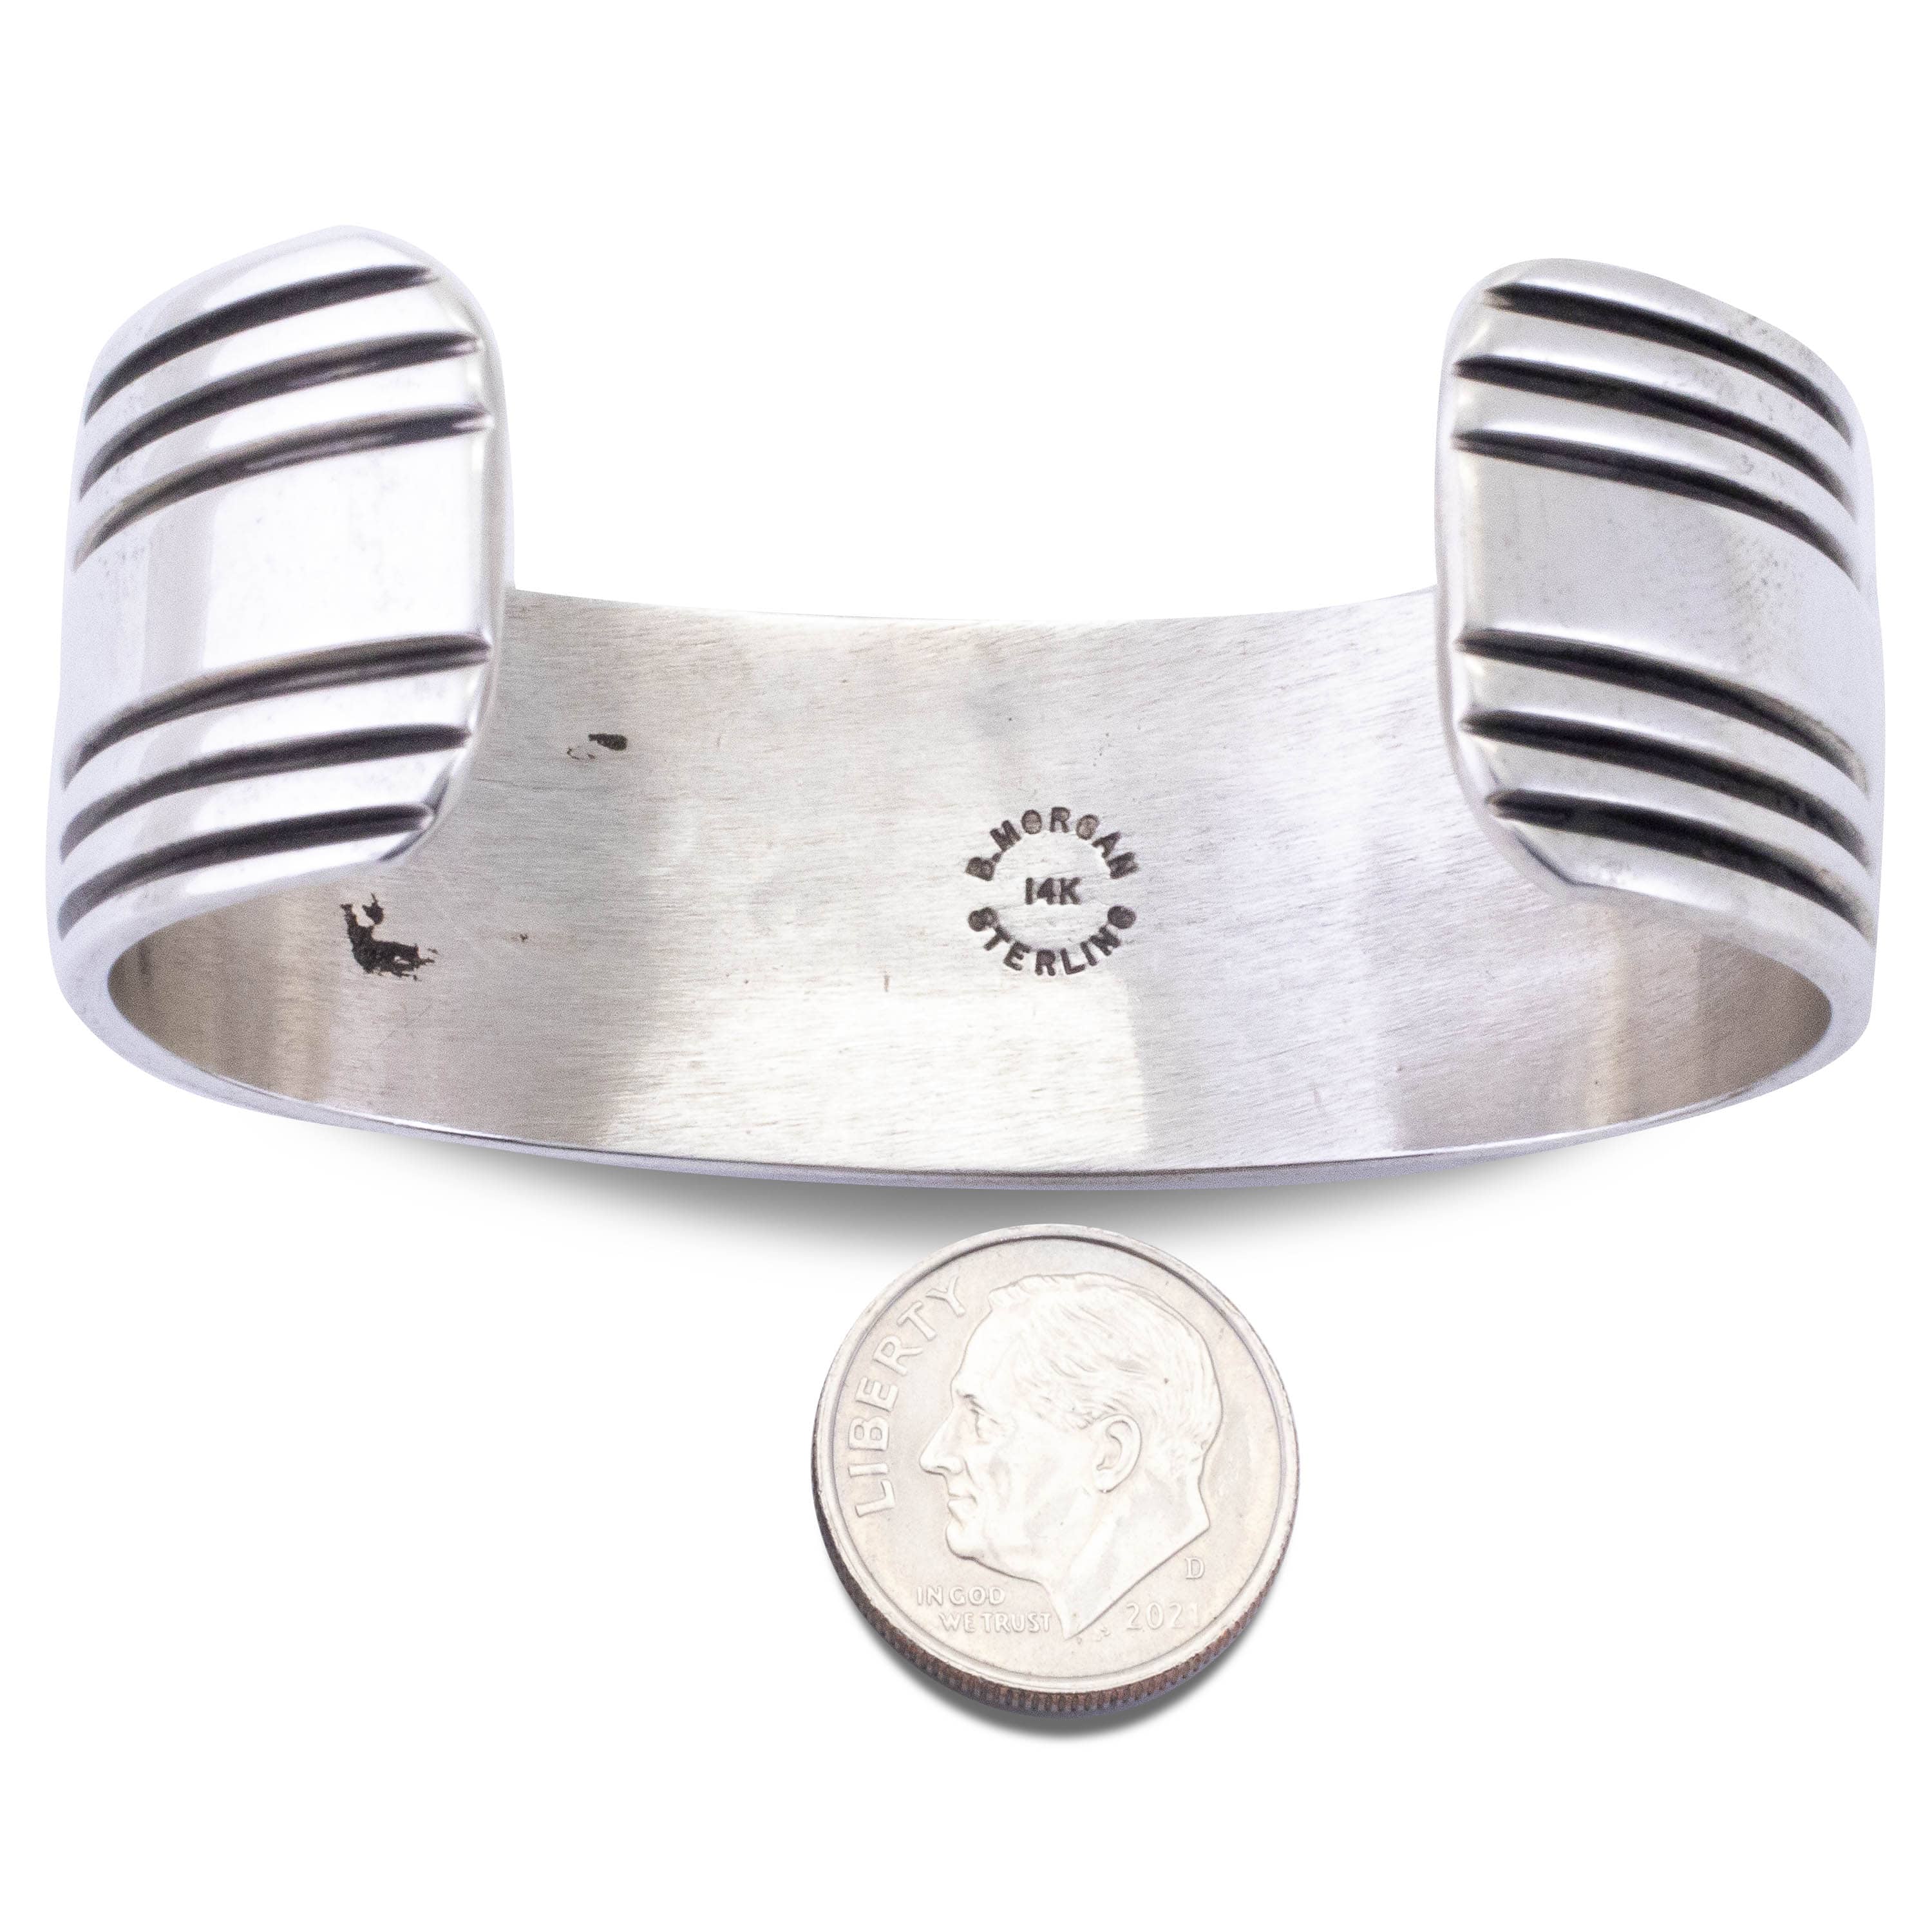 Kalifano Native American Jewelry Bruce Morgan Navajo USA Native American Made 925 Sterling Silver Cuff with 14K Gold NAB1900.009